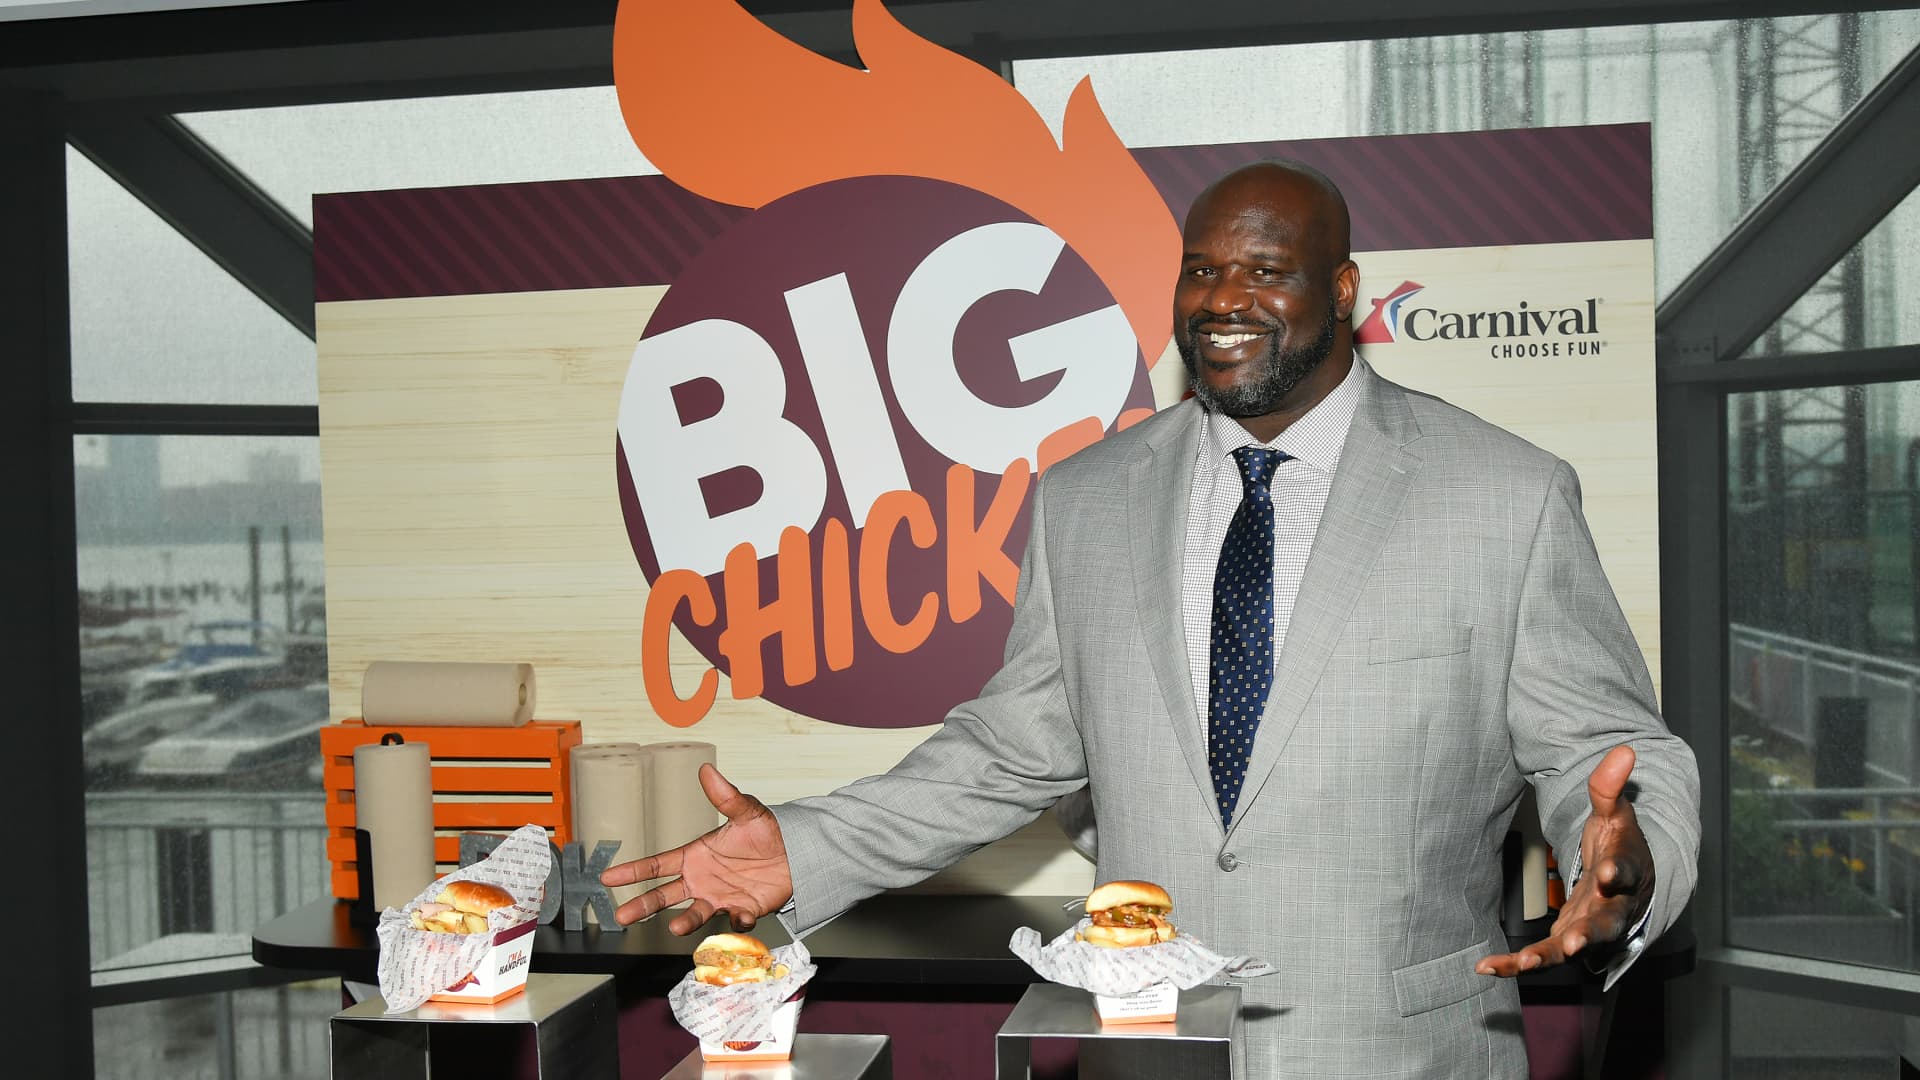 Shaquille O'Neal, NBA star and Carnival Cruise Line’s Chief Fun Officer, gives guests a taste of his highly-anticipated dishes that will be offered at sea as part of Big Chicken at Mardi Gras’ Summer Landing zone during Carnival Cruise Line's NYC Cruise Into Summer Event To Celebrate The Arrival Of Mardi Gras In 2020 at Pier 59 on June 18, 2019 in New York City.